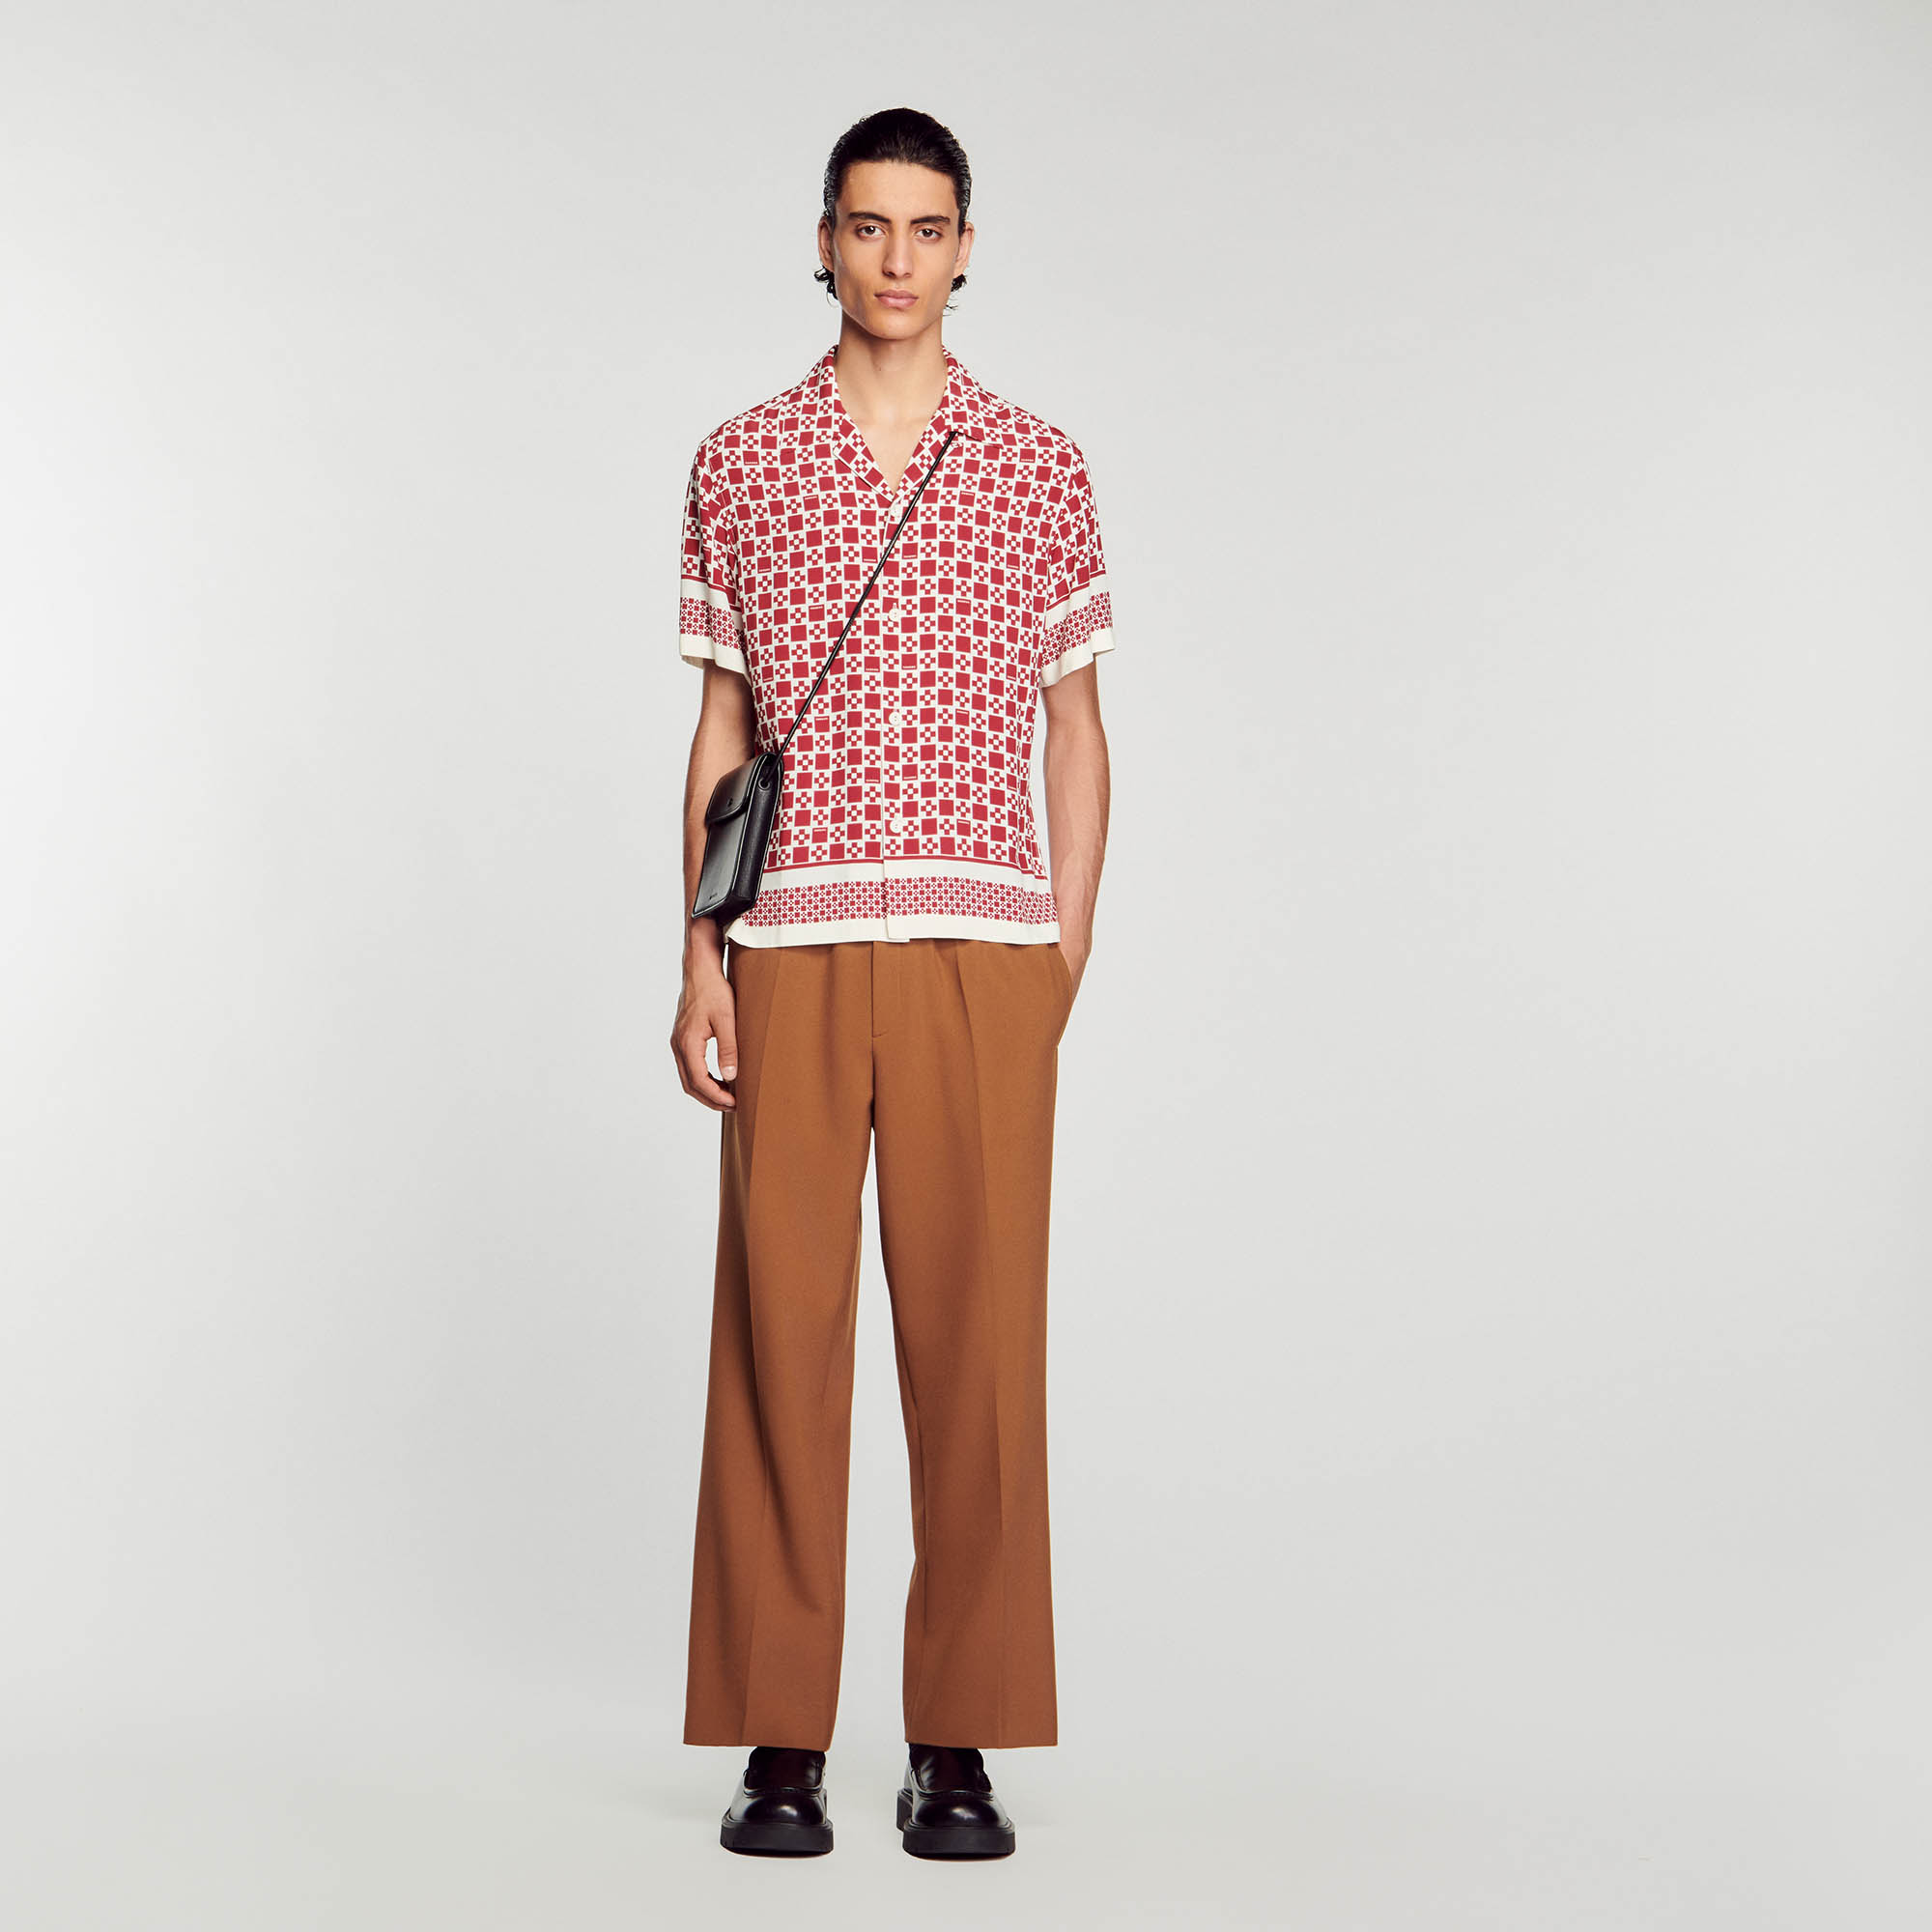 Sandro viscose Flowing button-down shirt with short sleeves, a shark collar, a Square Cross print, and a contrasting stripe on the bottom